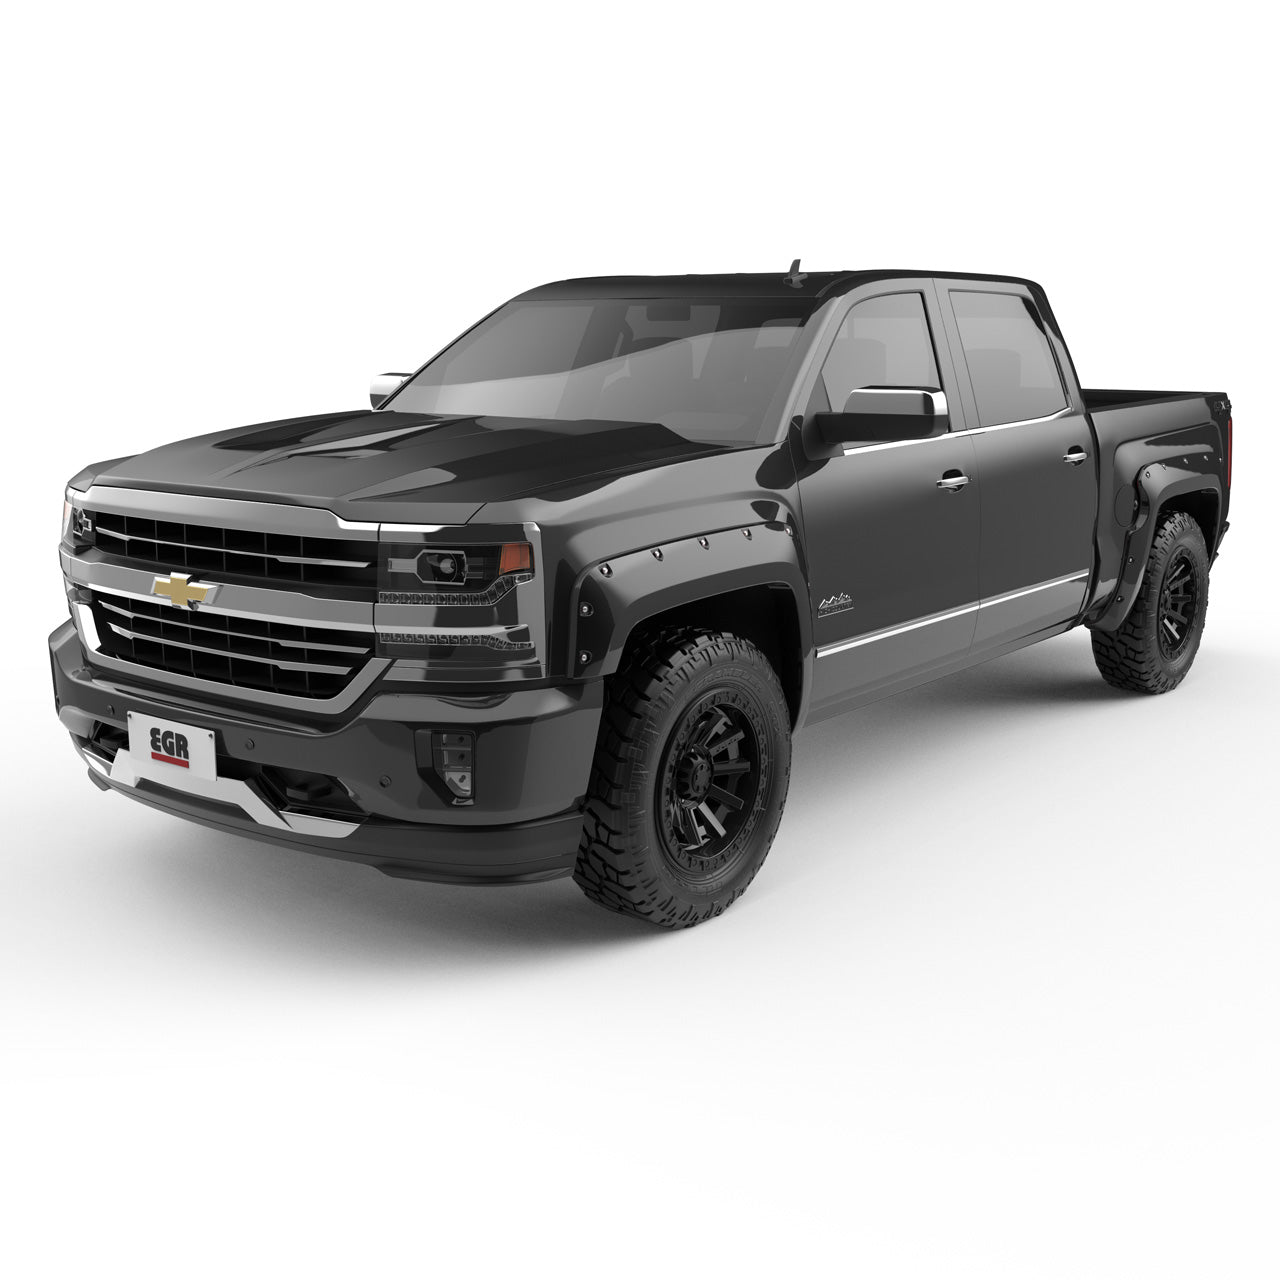 EGR Traditional Bolt-on look Fender Flares - 14-18 Chevrolet Silverado 1500 Short Box Only Painted to Code Black set of 4